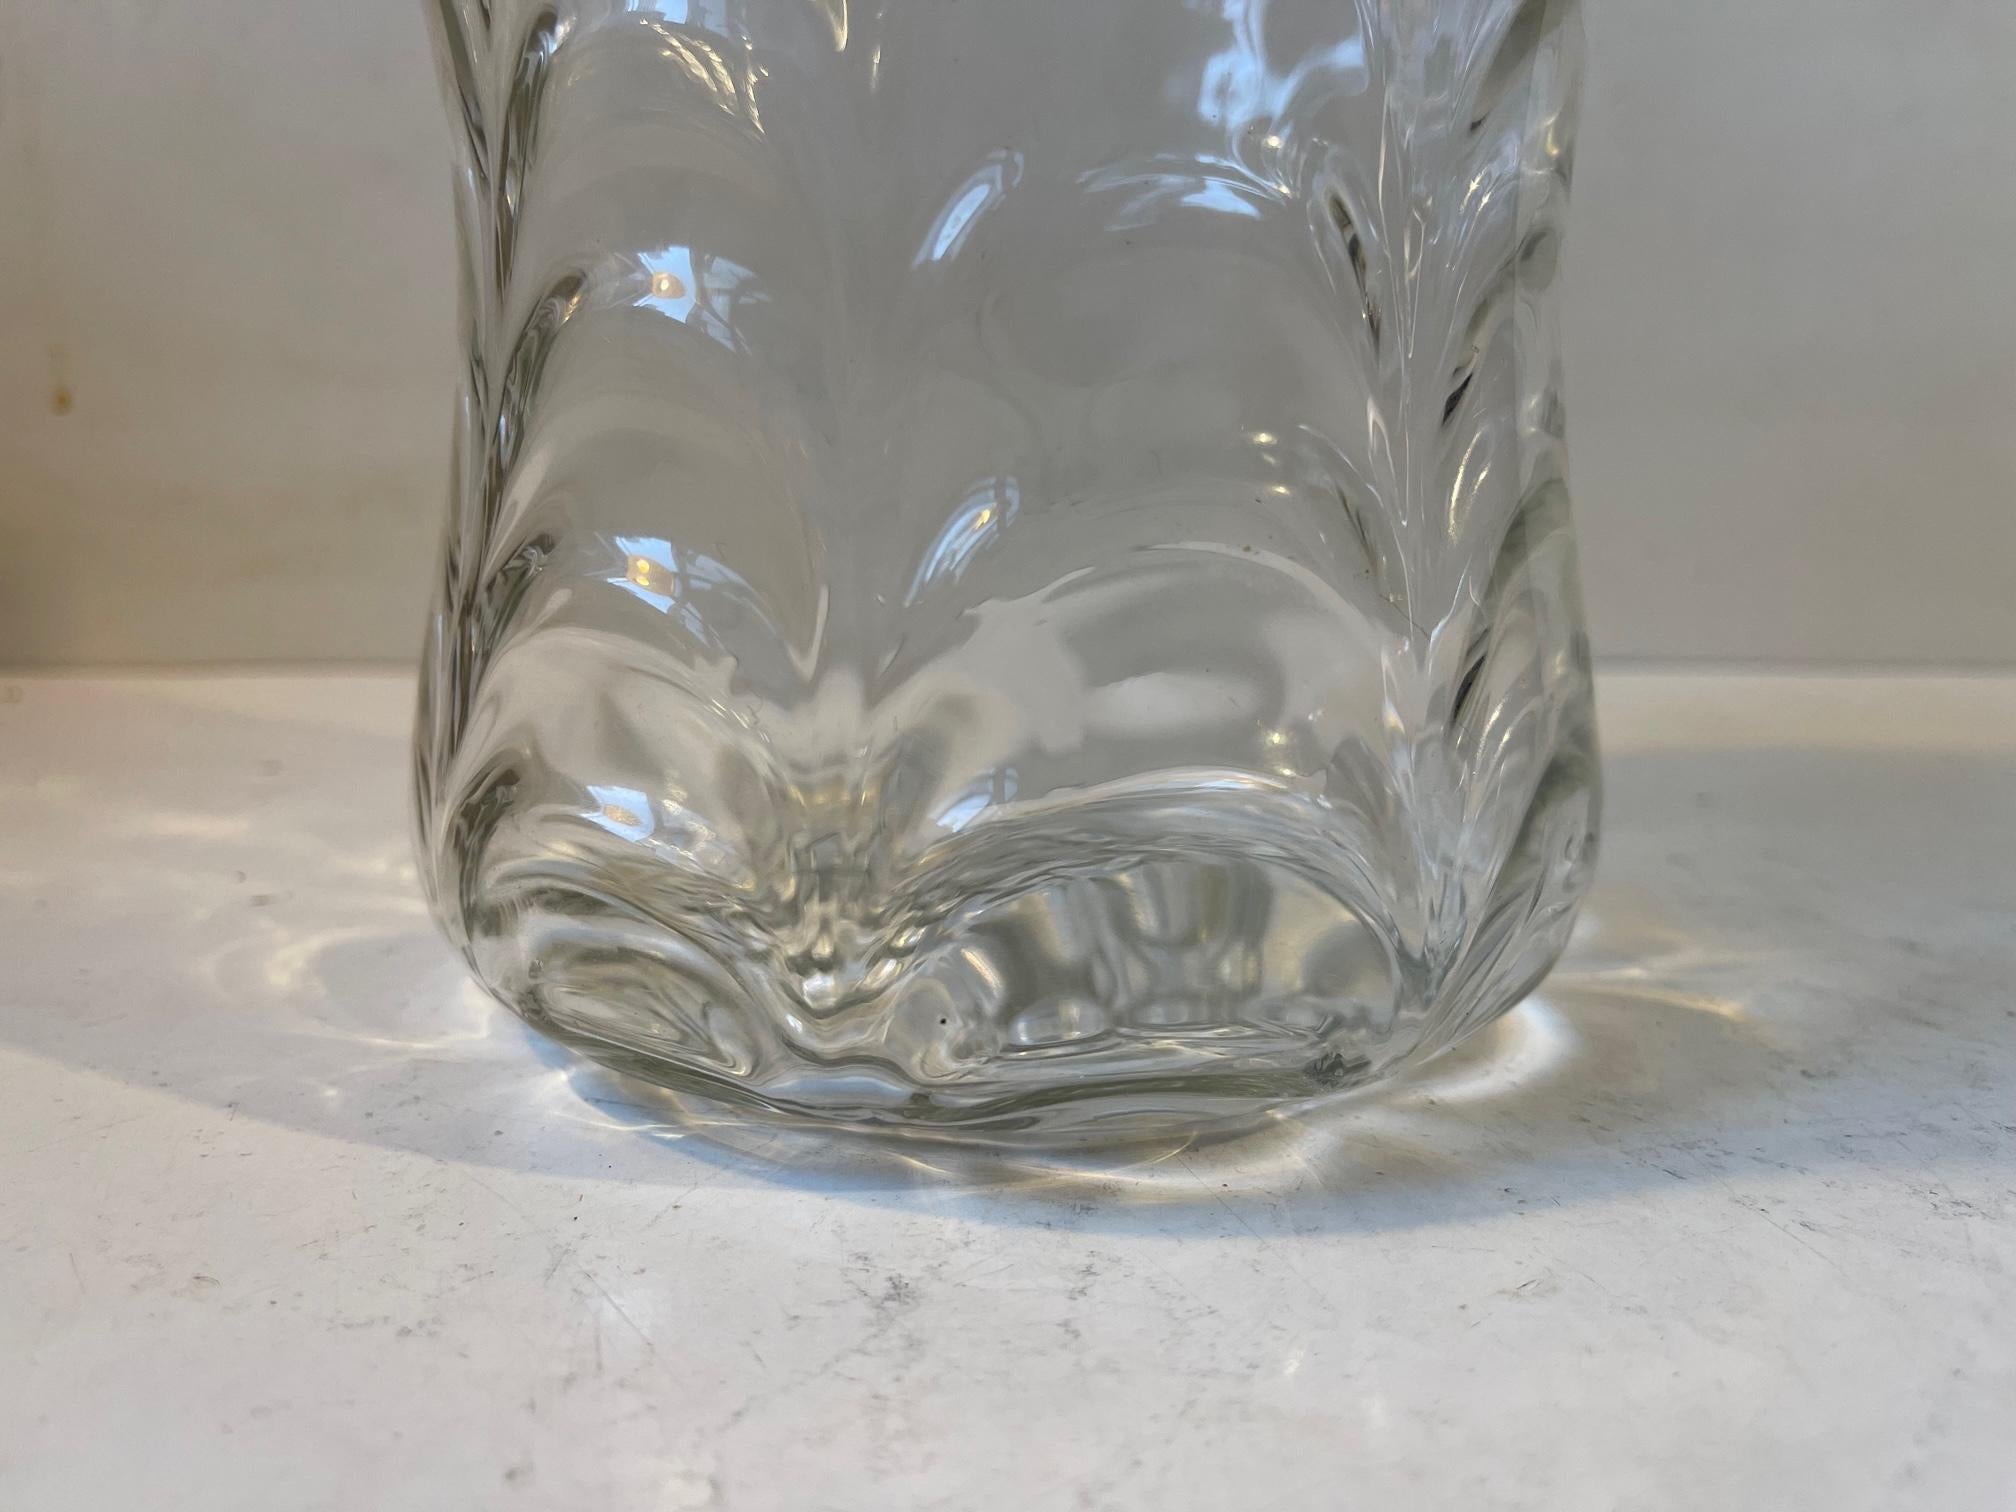 Late Victorian Antique Biscuit or Cookie Jar in Optical Glass by Holmegaard For Sale